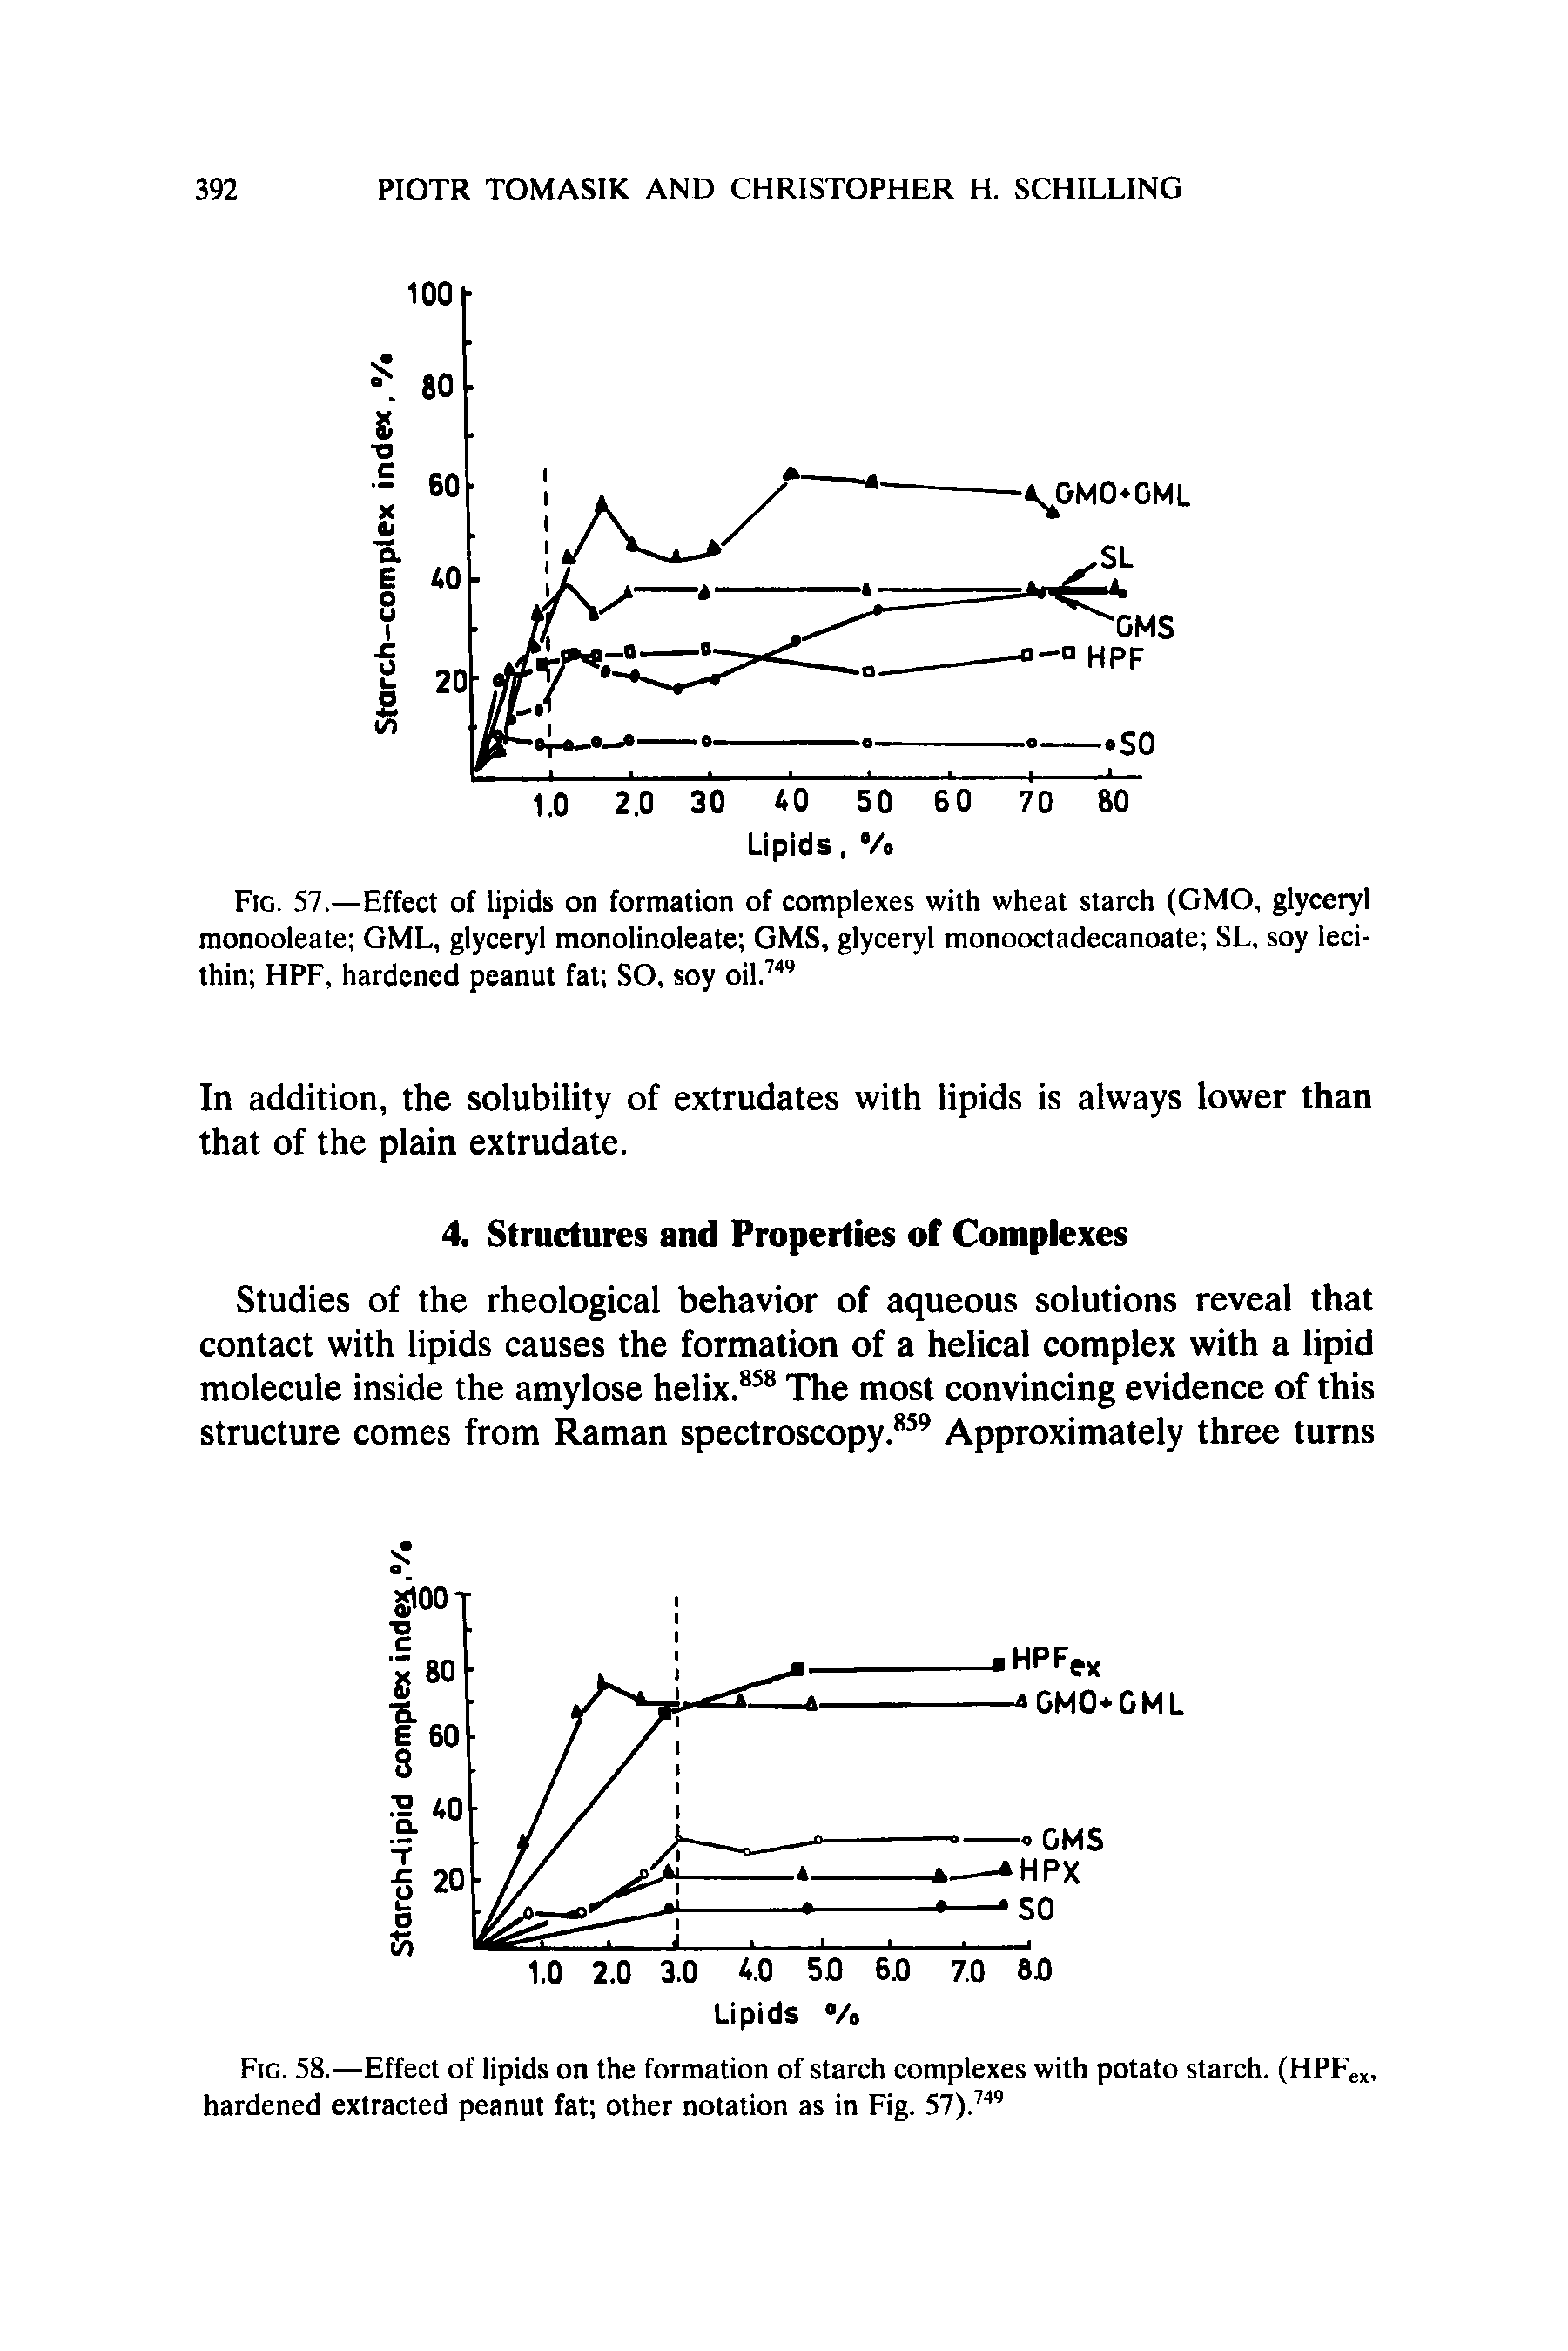 Fig. 57.—Effect of lipids on formation of complexes with wheat starch (GMO, glyceryl monooleate GML, glyceryl monolinoleate GMS, glyceryl monooctadecanoate SL, soy lecithin HPF, hardened peanut fat SO, soy oil.741 ...